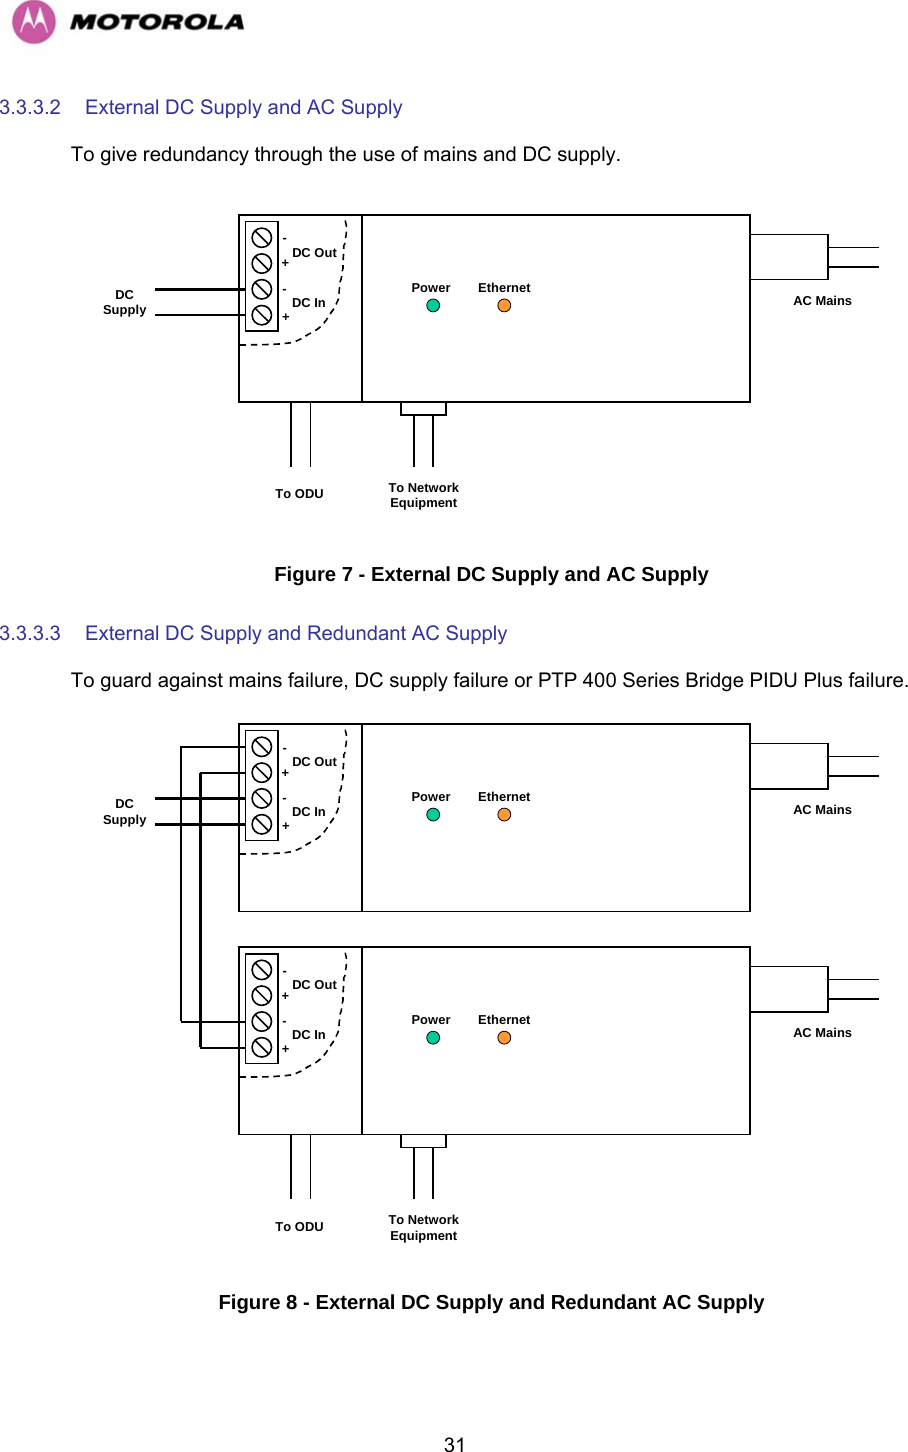   313.3.3.2  External DC Supply and AC Supply To give redundancy through the use of mains and DC supply. DC OutDC InTo NetworkEquipmentTo ODUAC Mains++--DCSupplyPower Ethernet Figure 7 - External DC Supply and AC Supply 3.3.3.3  External DC Supply and Redundant AC Supply To guard against mains failure, DC supply failure or PTP 400 Series Bridge PIDU Plus failure. DC OutDC In AC Mains++--DCSupplyPower EthernetDC OutDC InTo NetworkEquipmentTo ODUAC Mains++--Power Ethernet Figure 8 - External DC Supply and Redundant AC Supply 